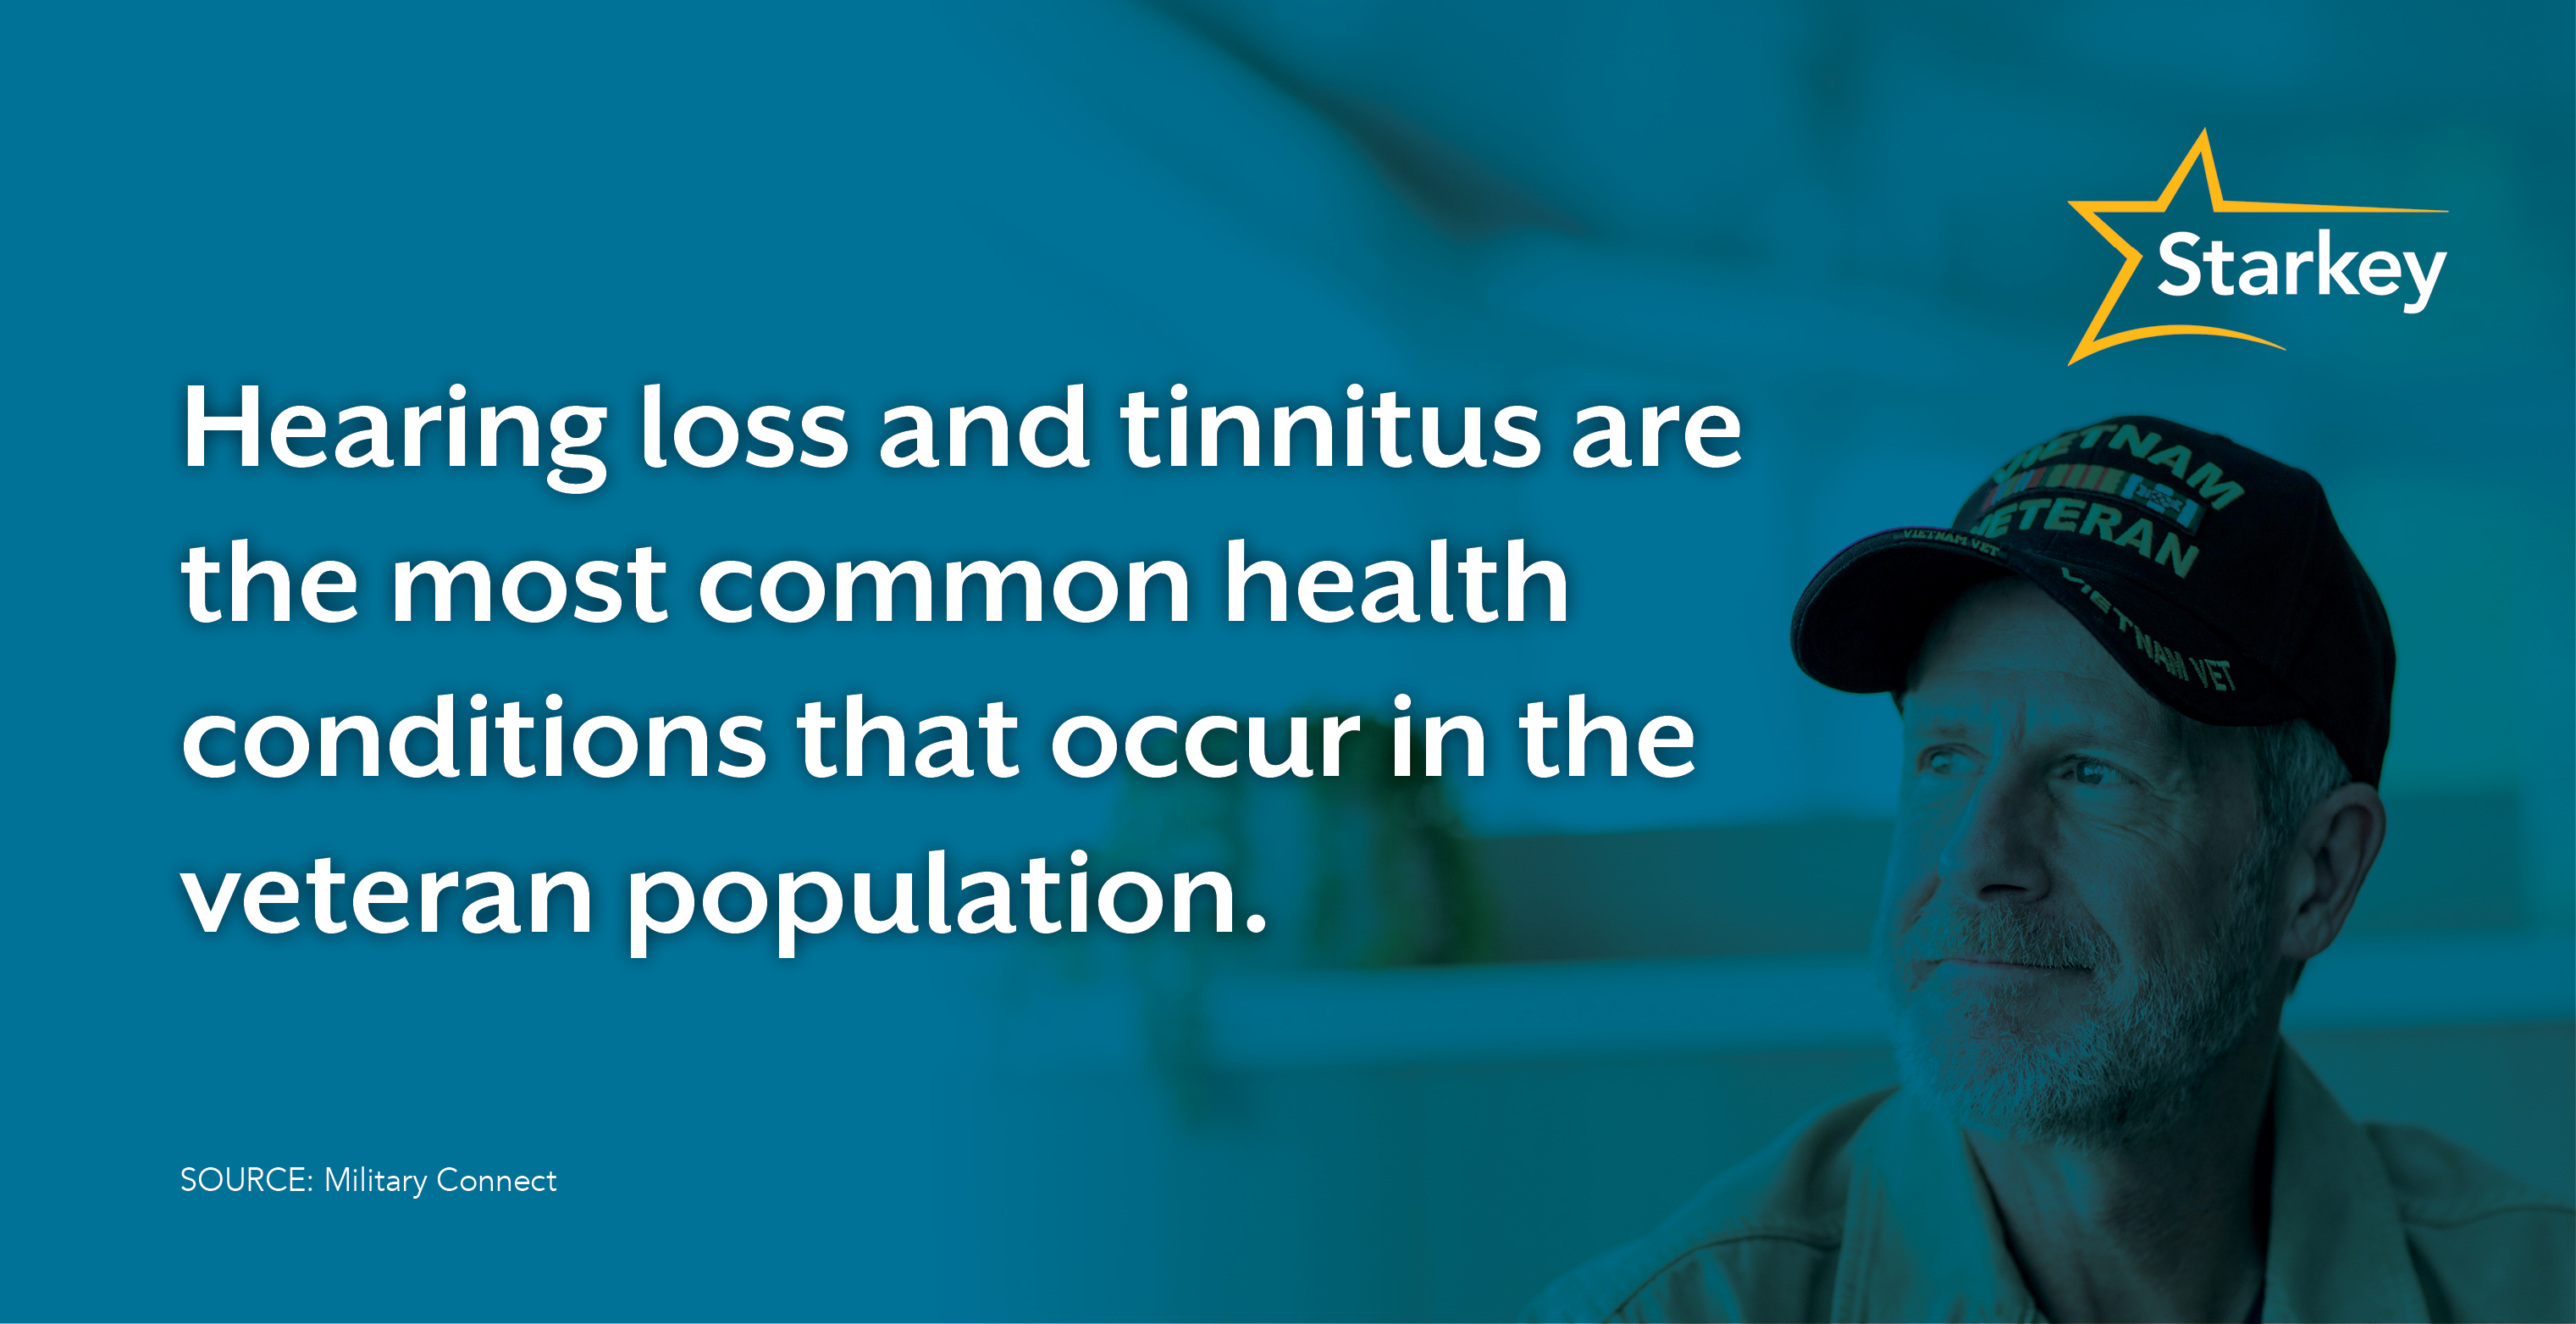 Image of veteran and fact that says "Hearing loss and tinnitus are the most common health conditions that occur in the veteran population."